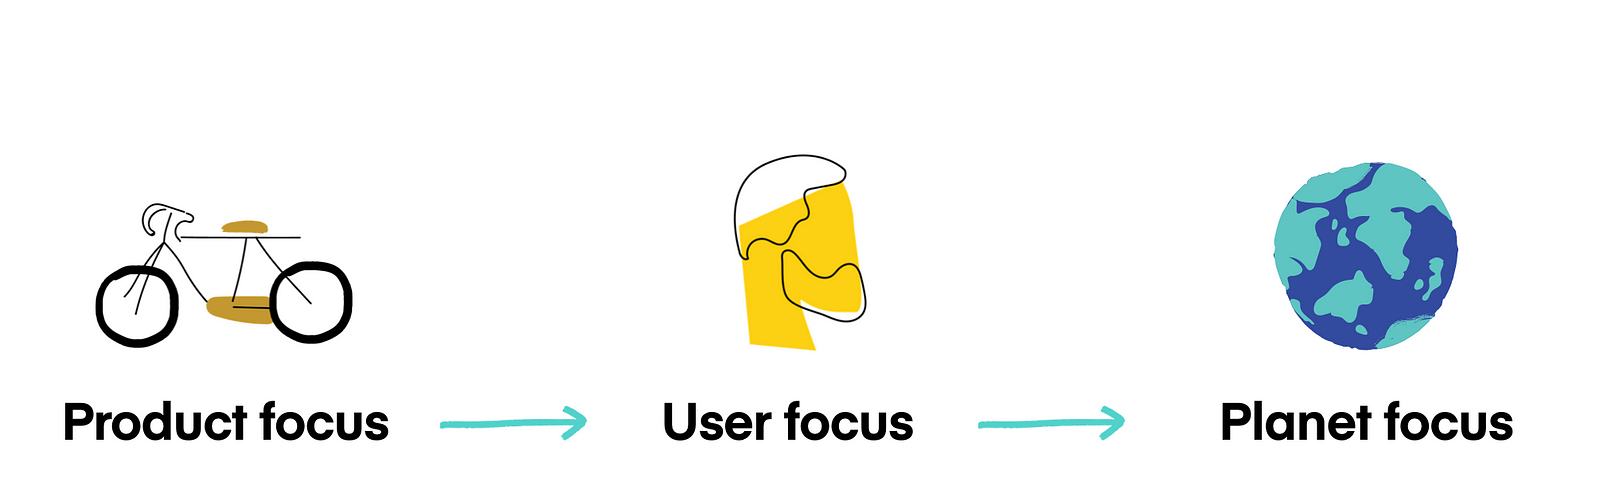 Illustration of the process from product focus, user focus to planet focus